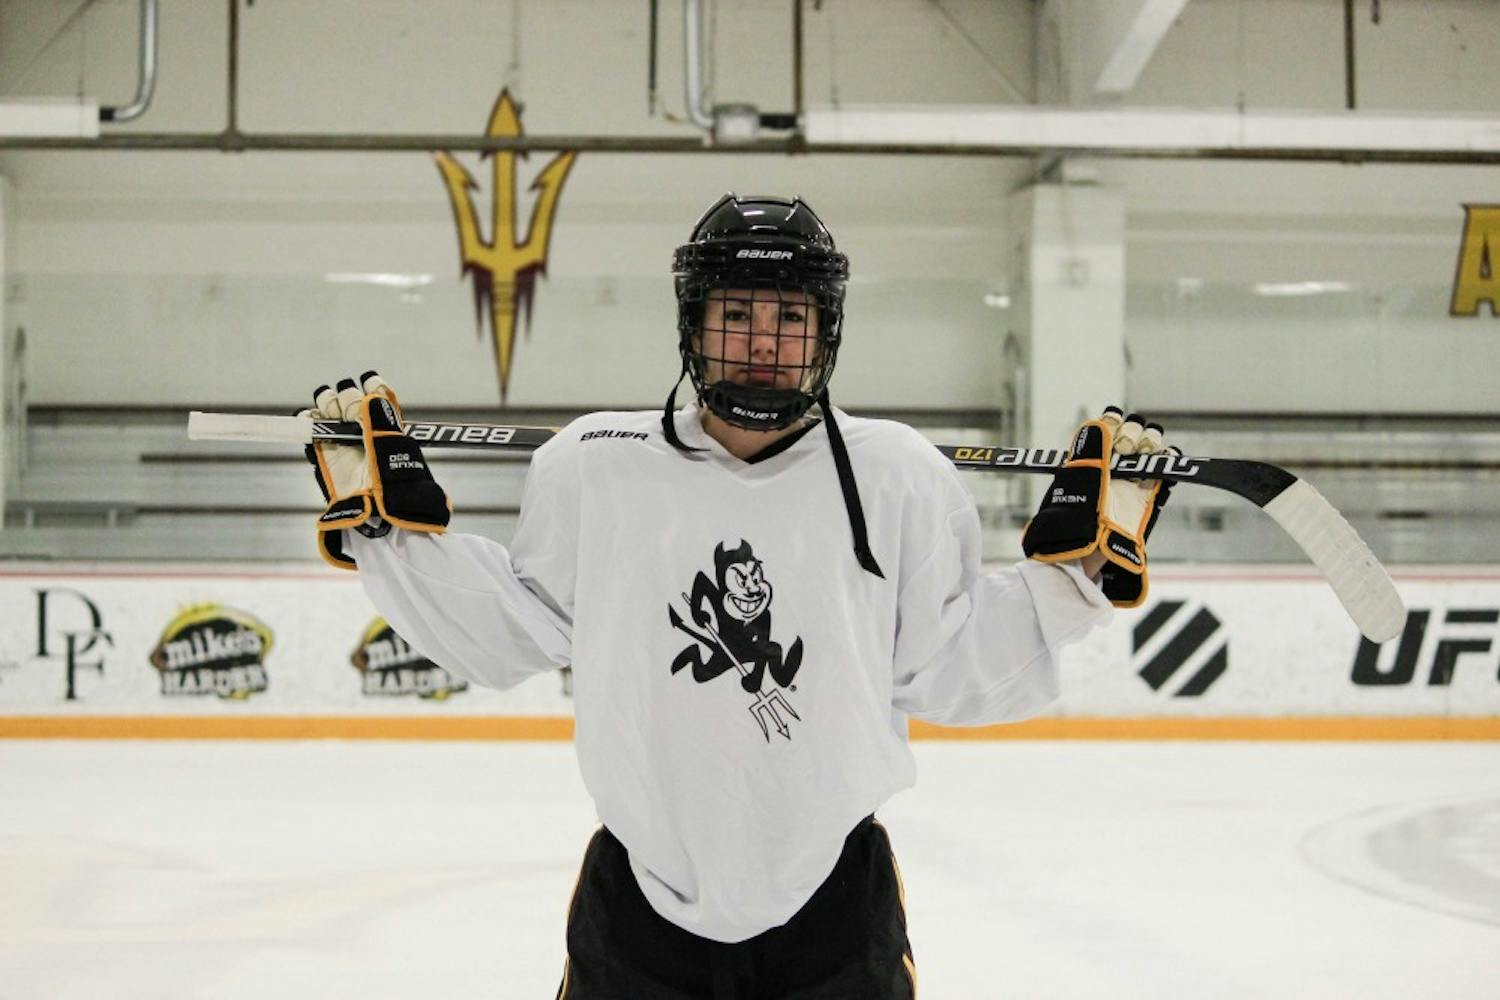 ASU women's hockey sophomore defenseman Brooke Kelsall poses for a picture after practice at Oceanside Ice Arena in Tempe on Tuesday, Sept. 13. 